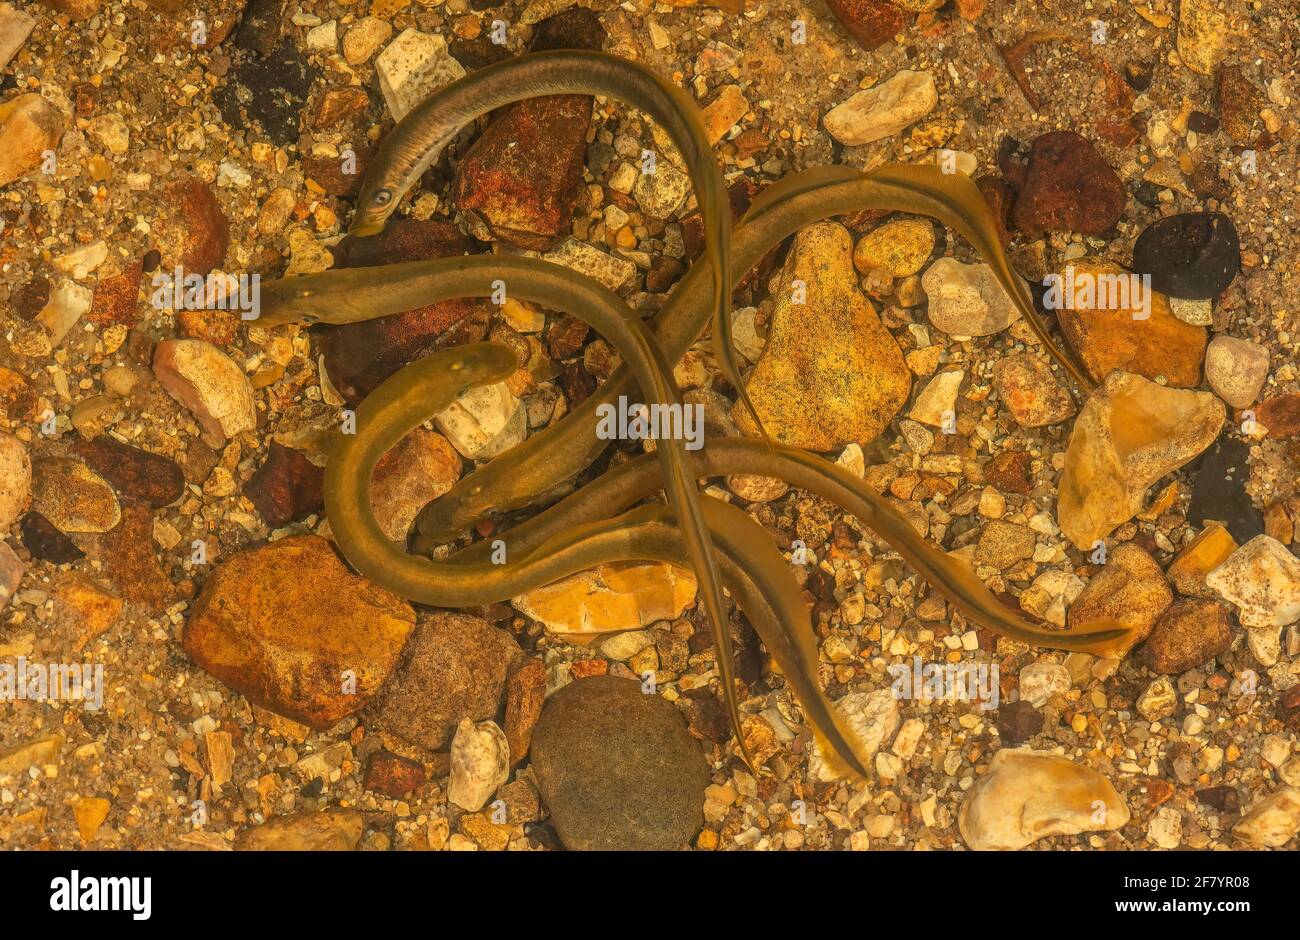 Brook lamprey, Lampetra planeri, gathering of adults in the breeding season. New Forest stream. Stock Photo